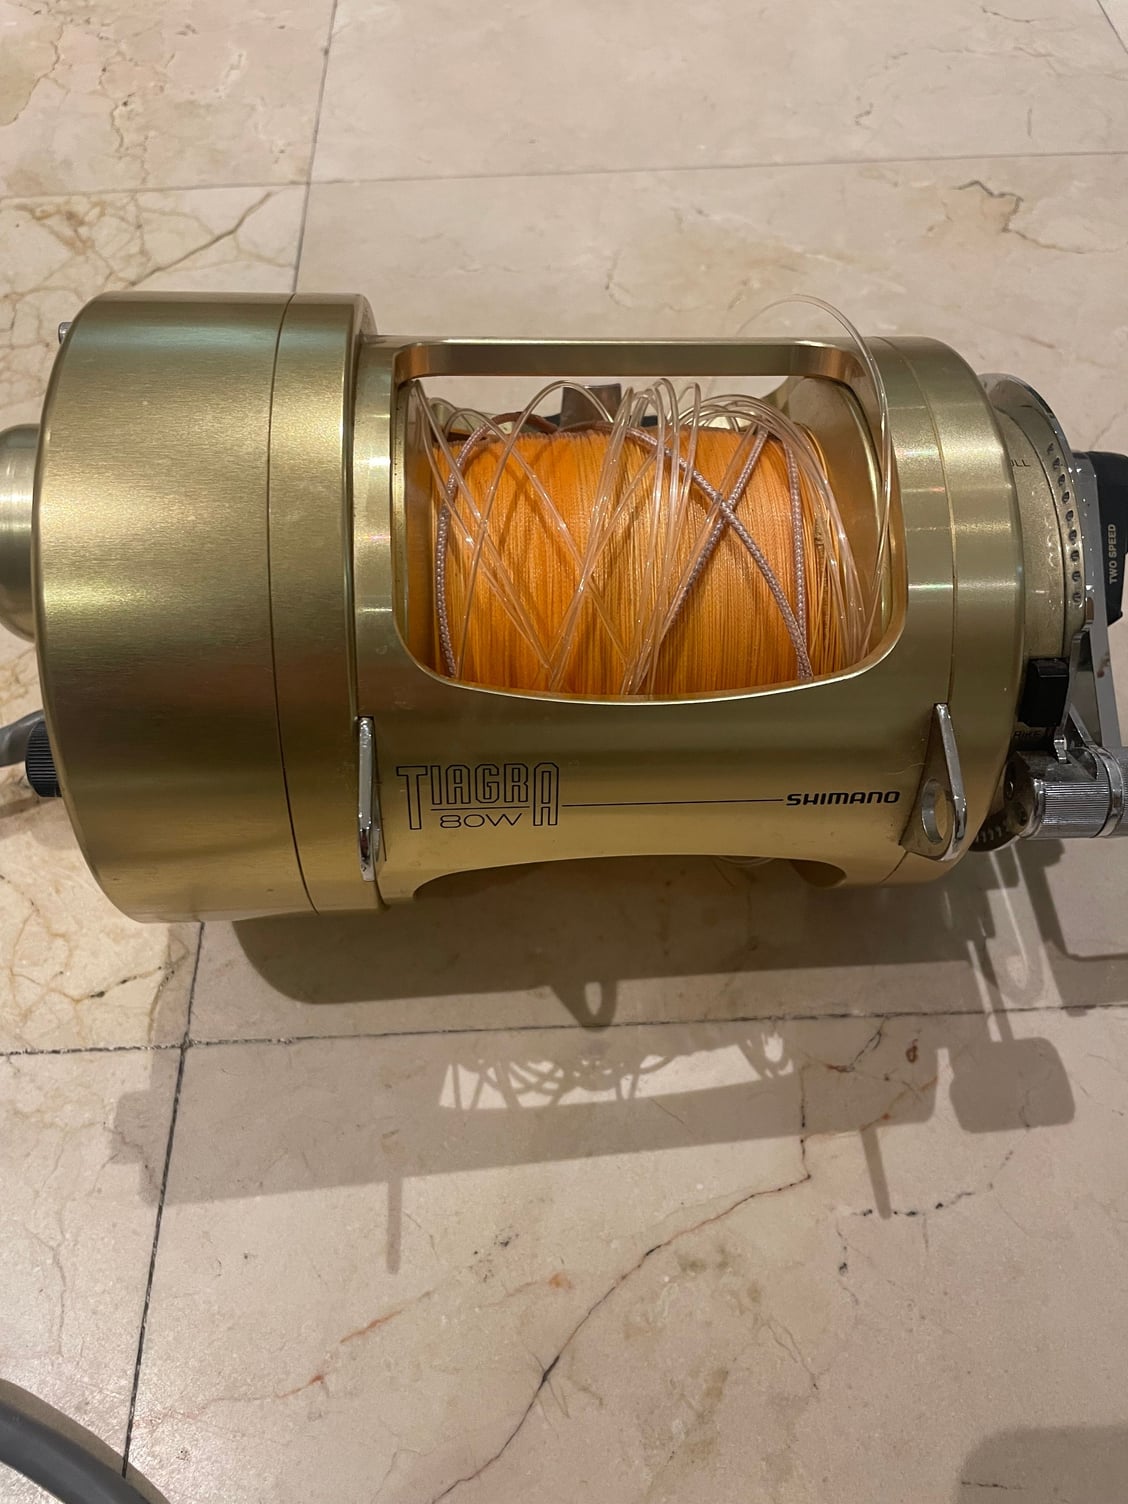 Hooker Electric Reel Shimano Tiagra 80W - The Hull Truth - Boating